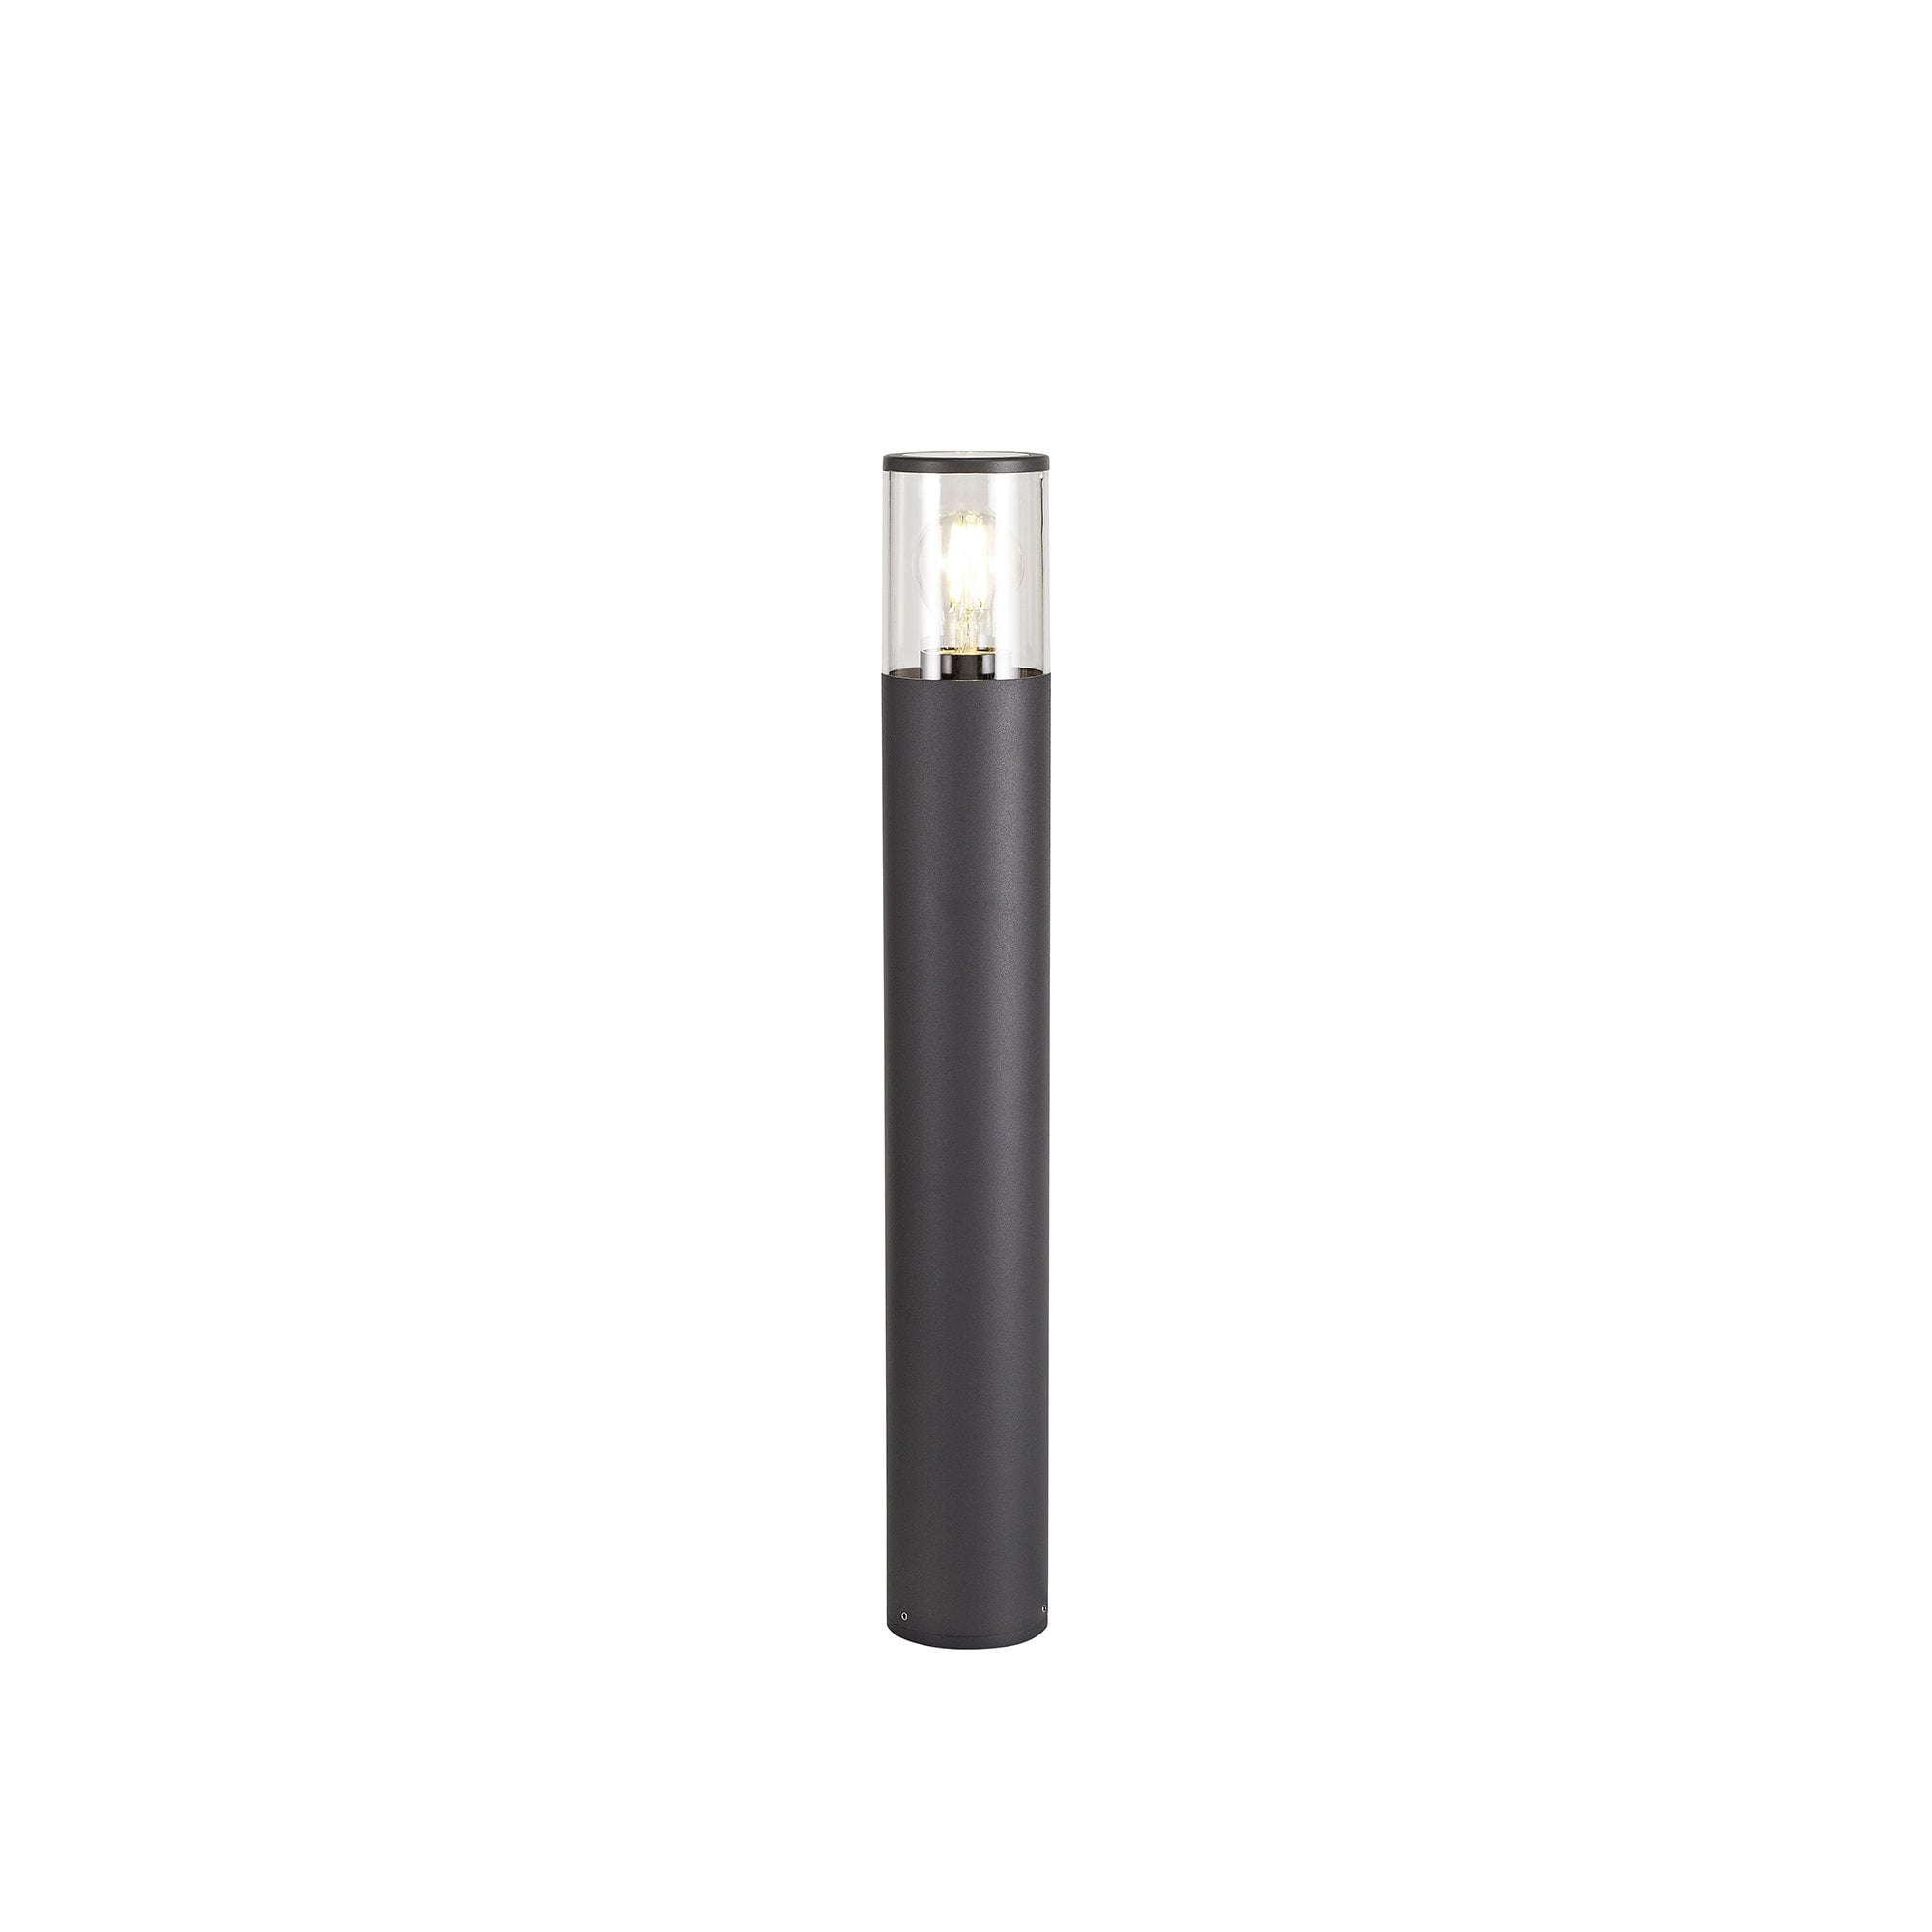 65cm Post Lamp 1 x E27, IP54, Anthracite/Smoked, 2yrs Warranty